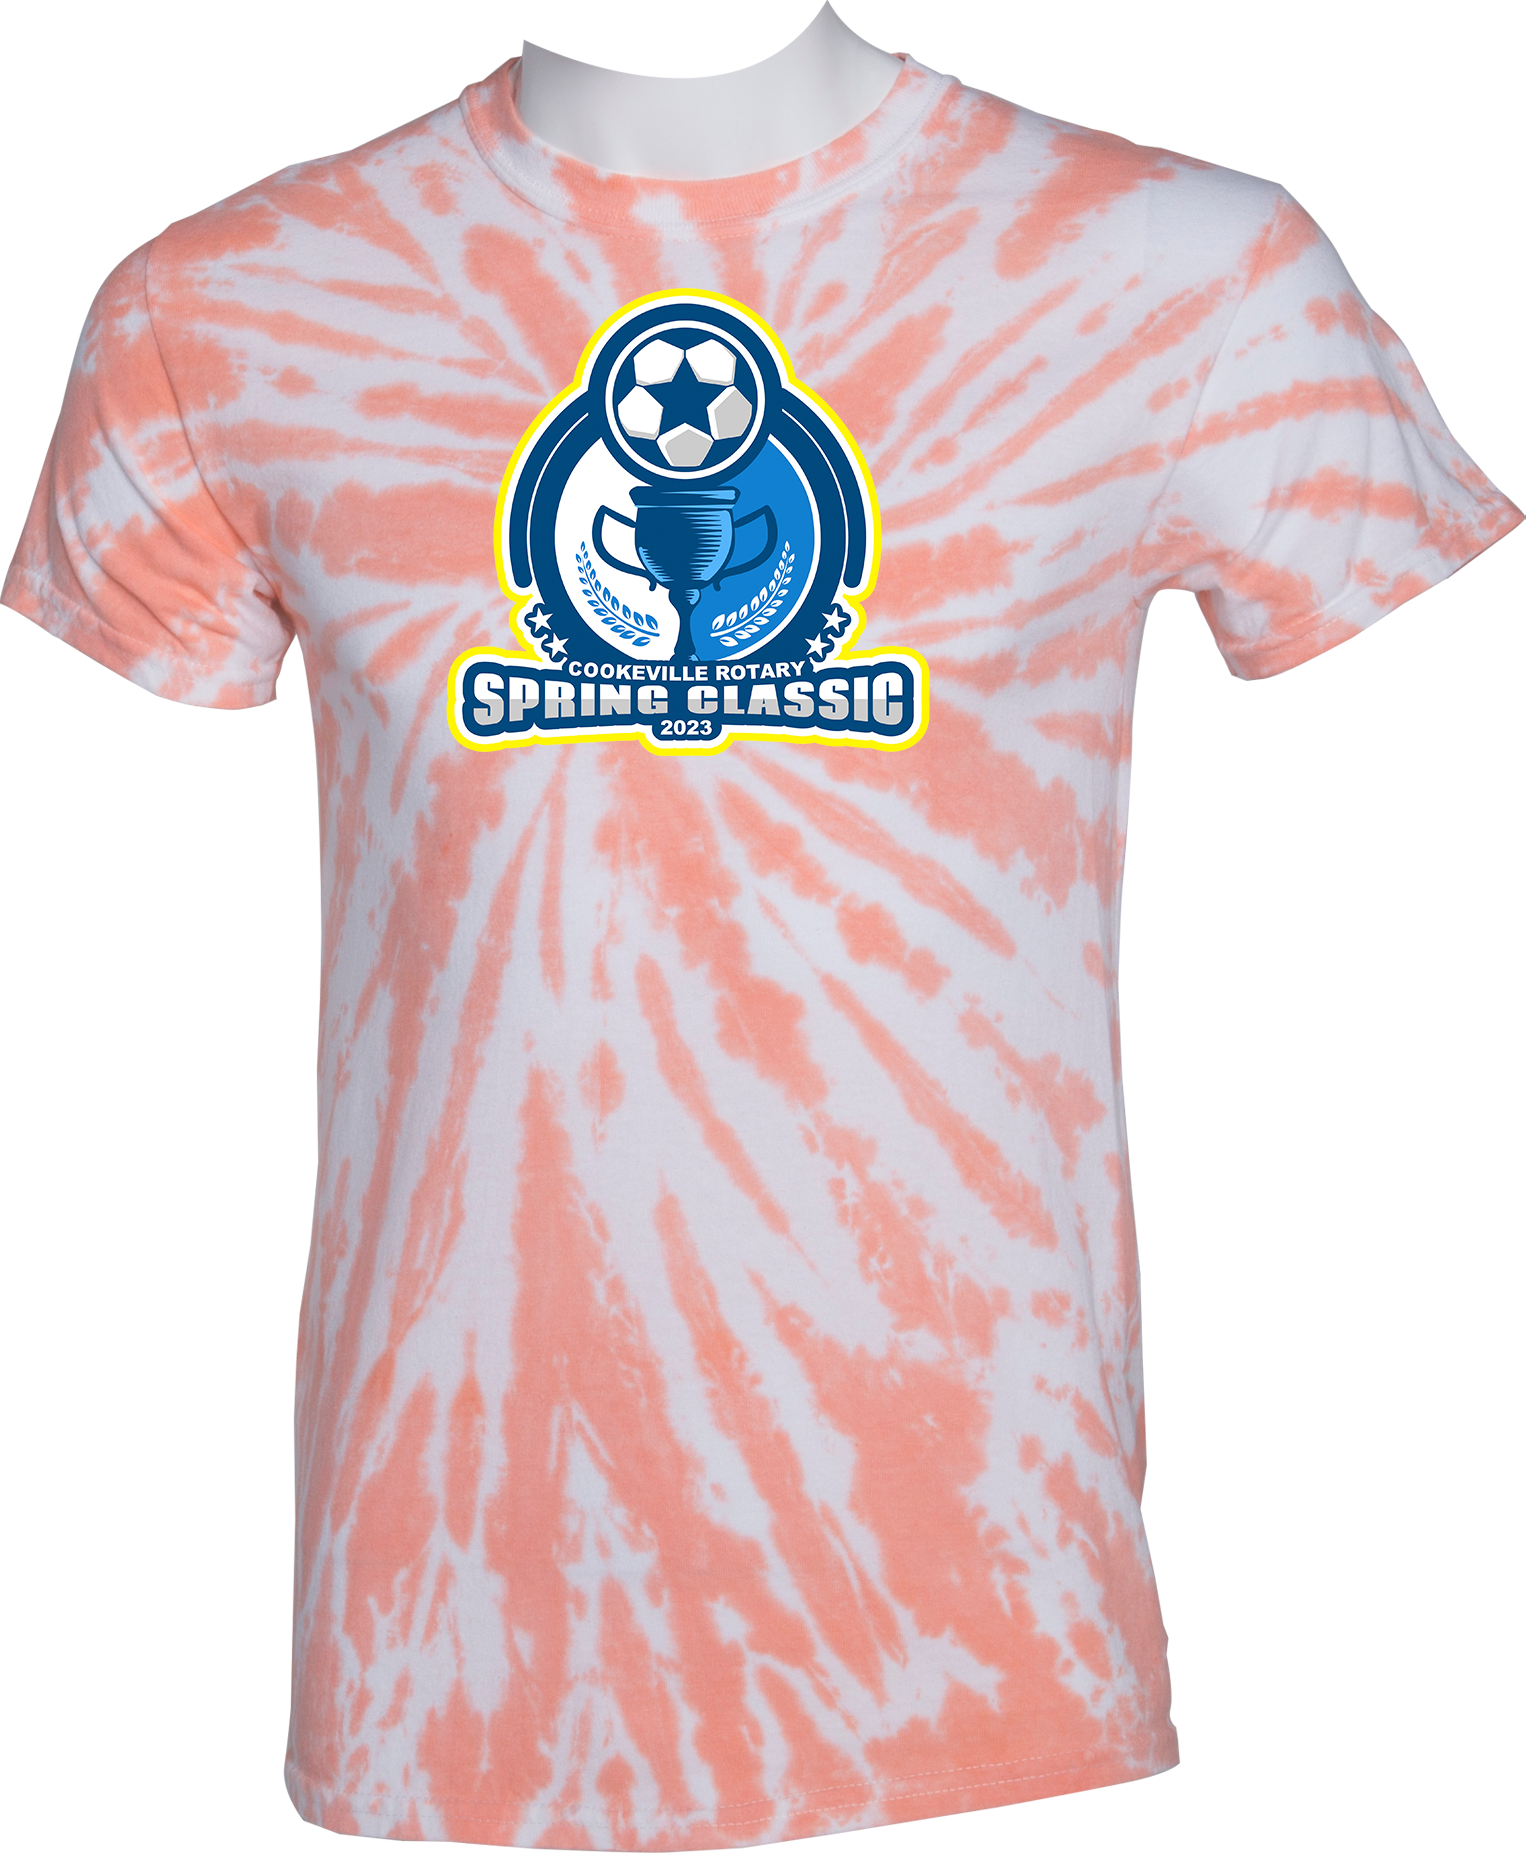 TIE-DYE SHORT SLEEVES - 2023 Cookesville Rotary Soccer Classic